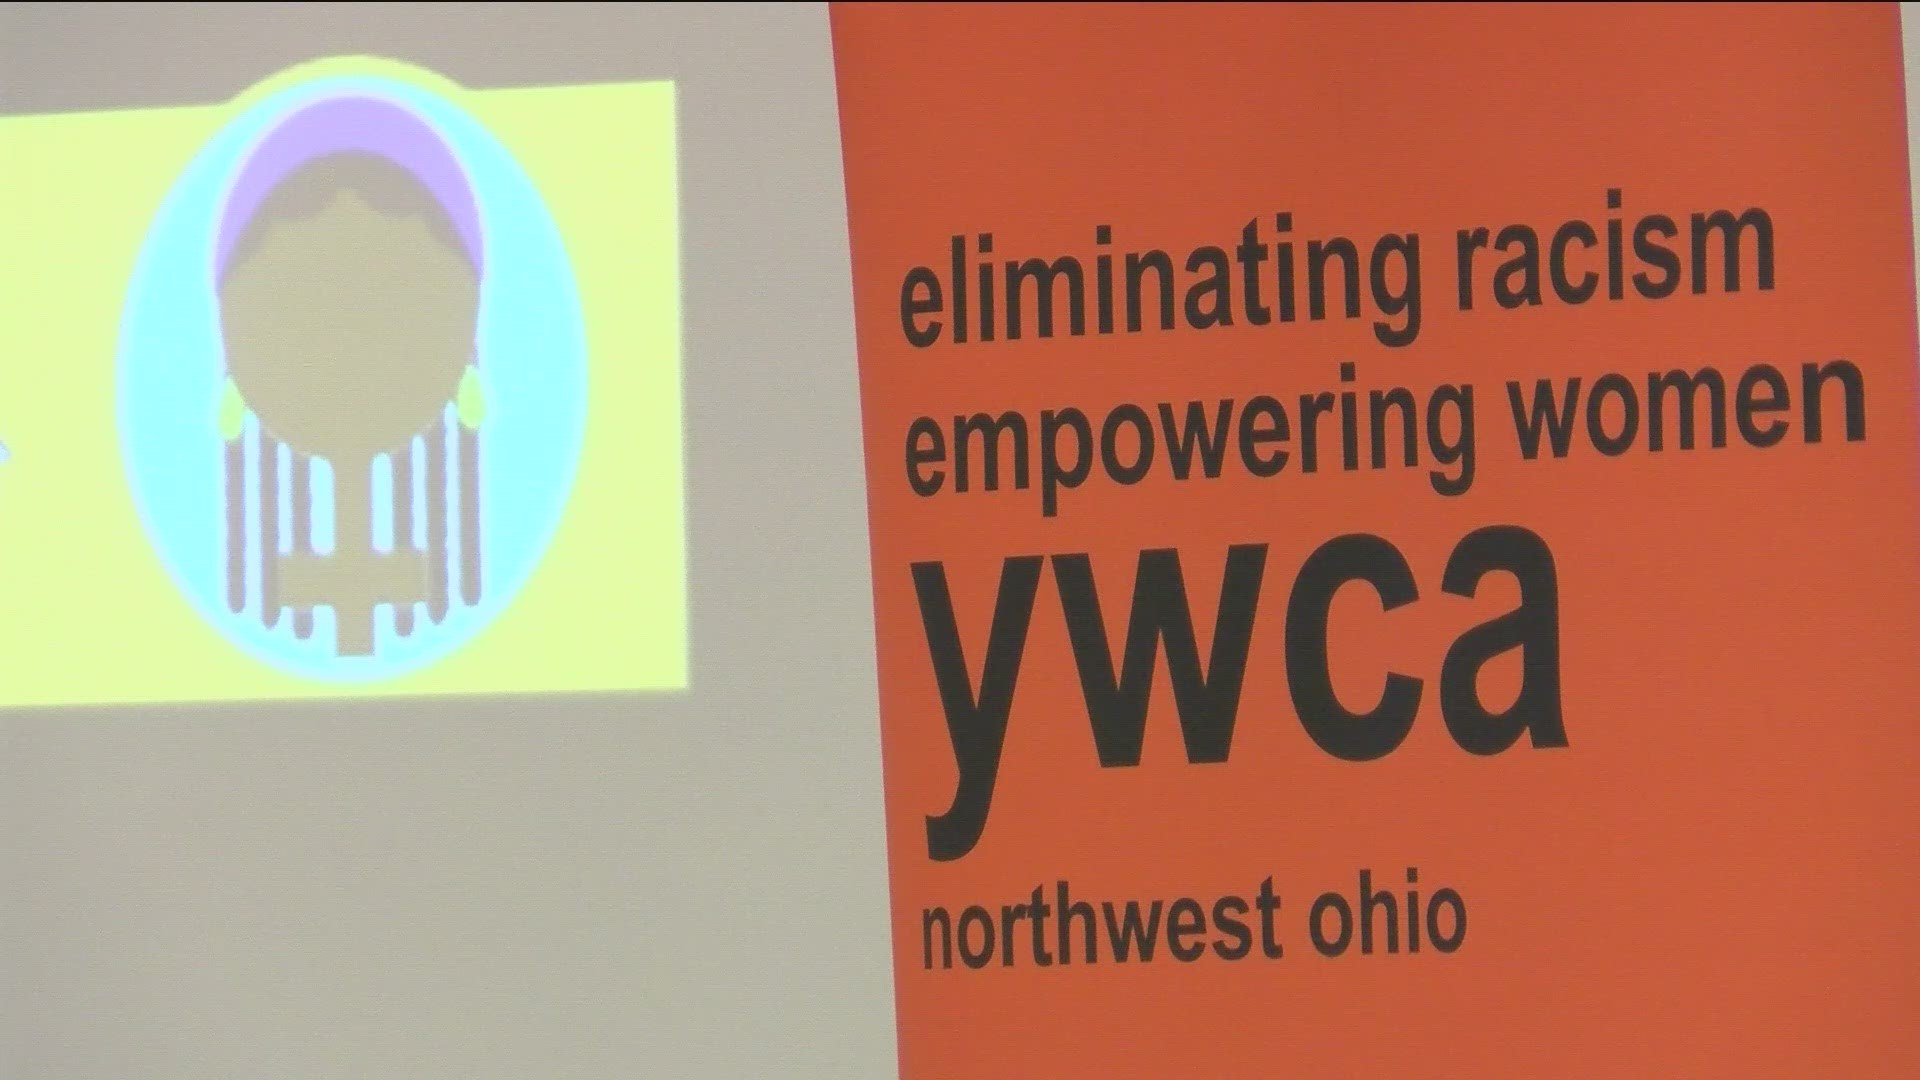 Lisa McDuffie, president of the YWCA, says stepping out of your comfort zone is necessary to create spaces of equity and inclusion,